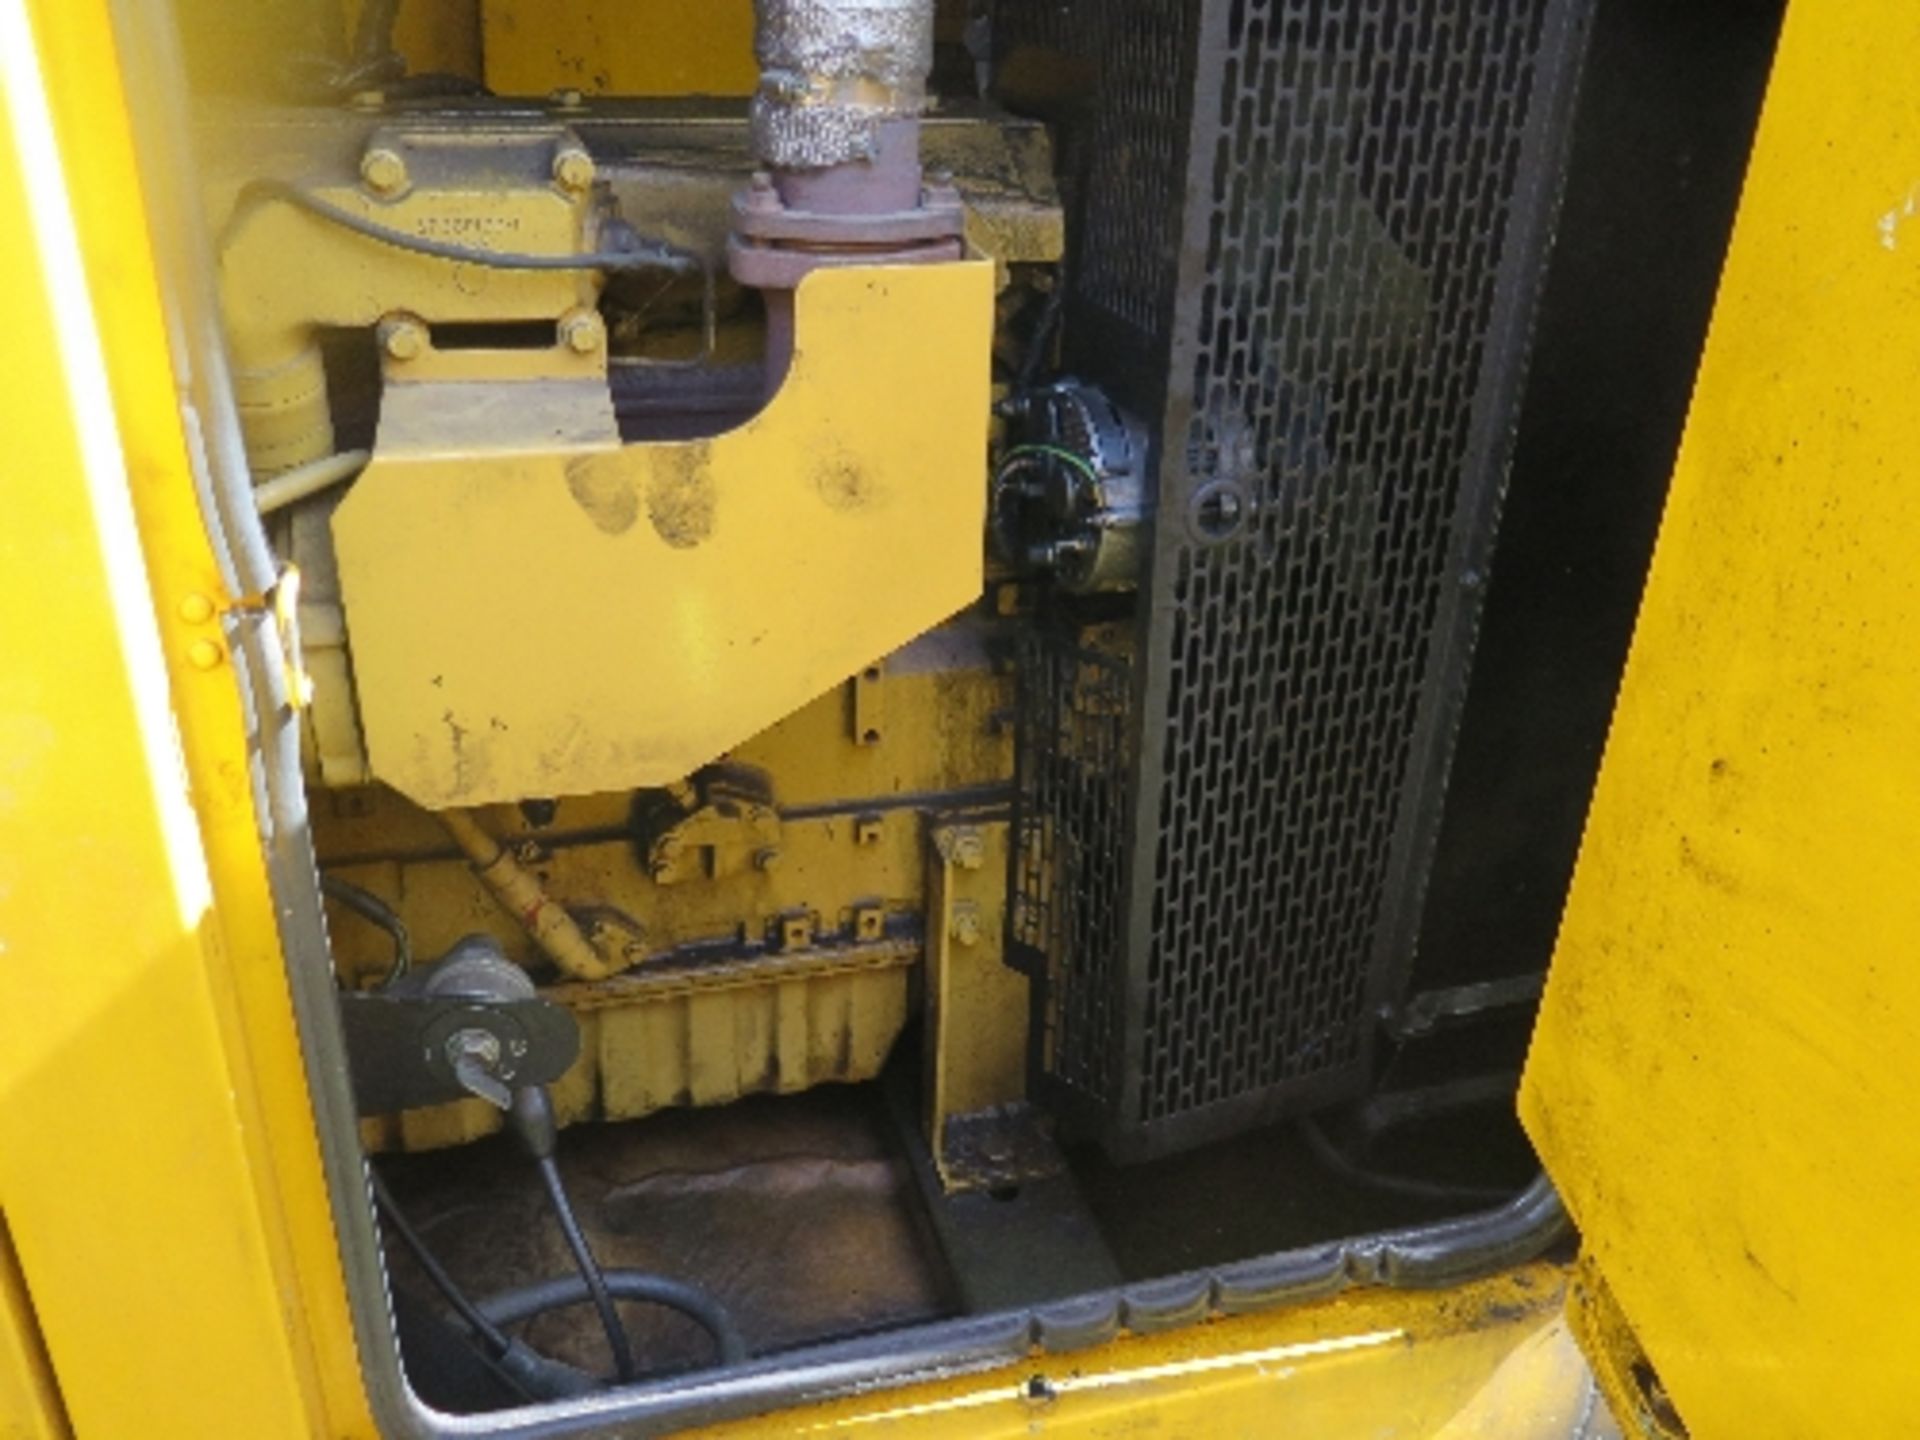 Caterpillar XQE100 generator 30132 hrs 138851
PERKINS - RUNS AND MAKES POWER
ALL LOTS are SOLD - Image 6 of 6